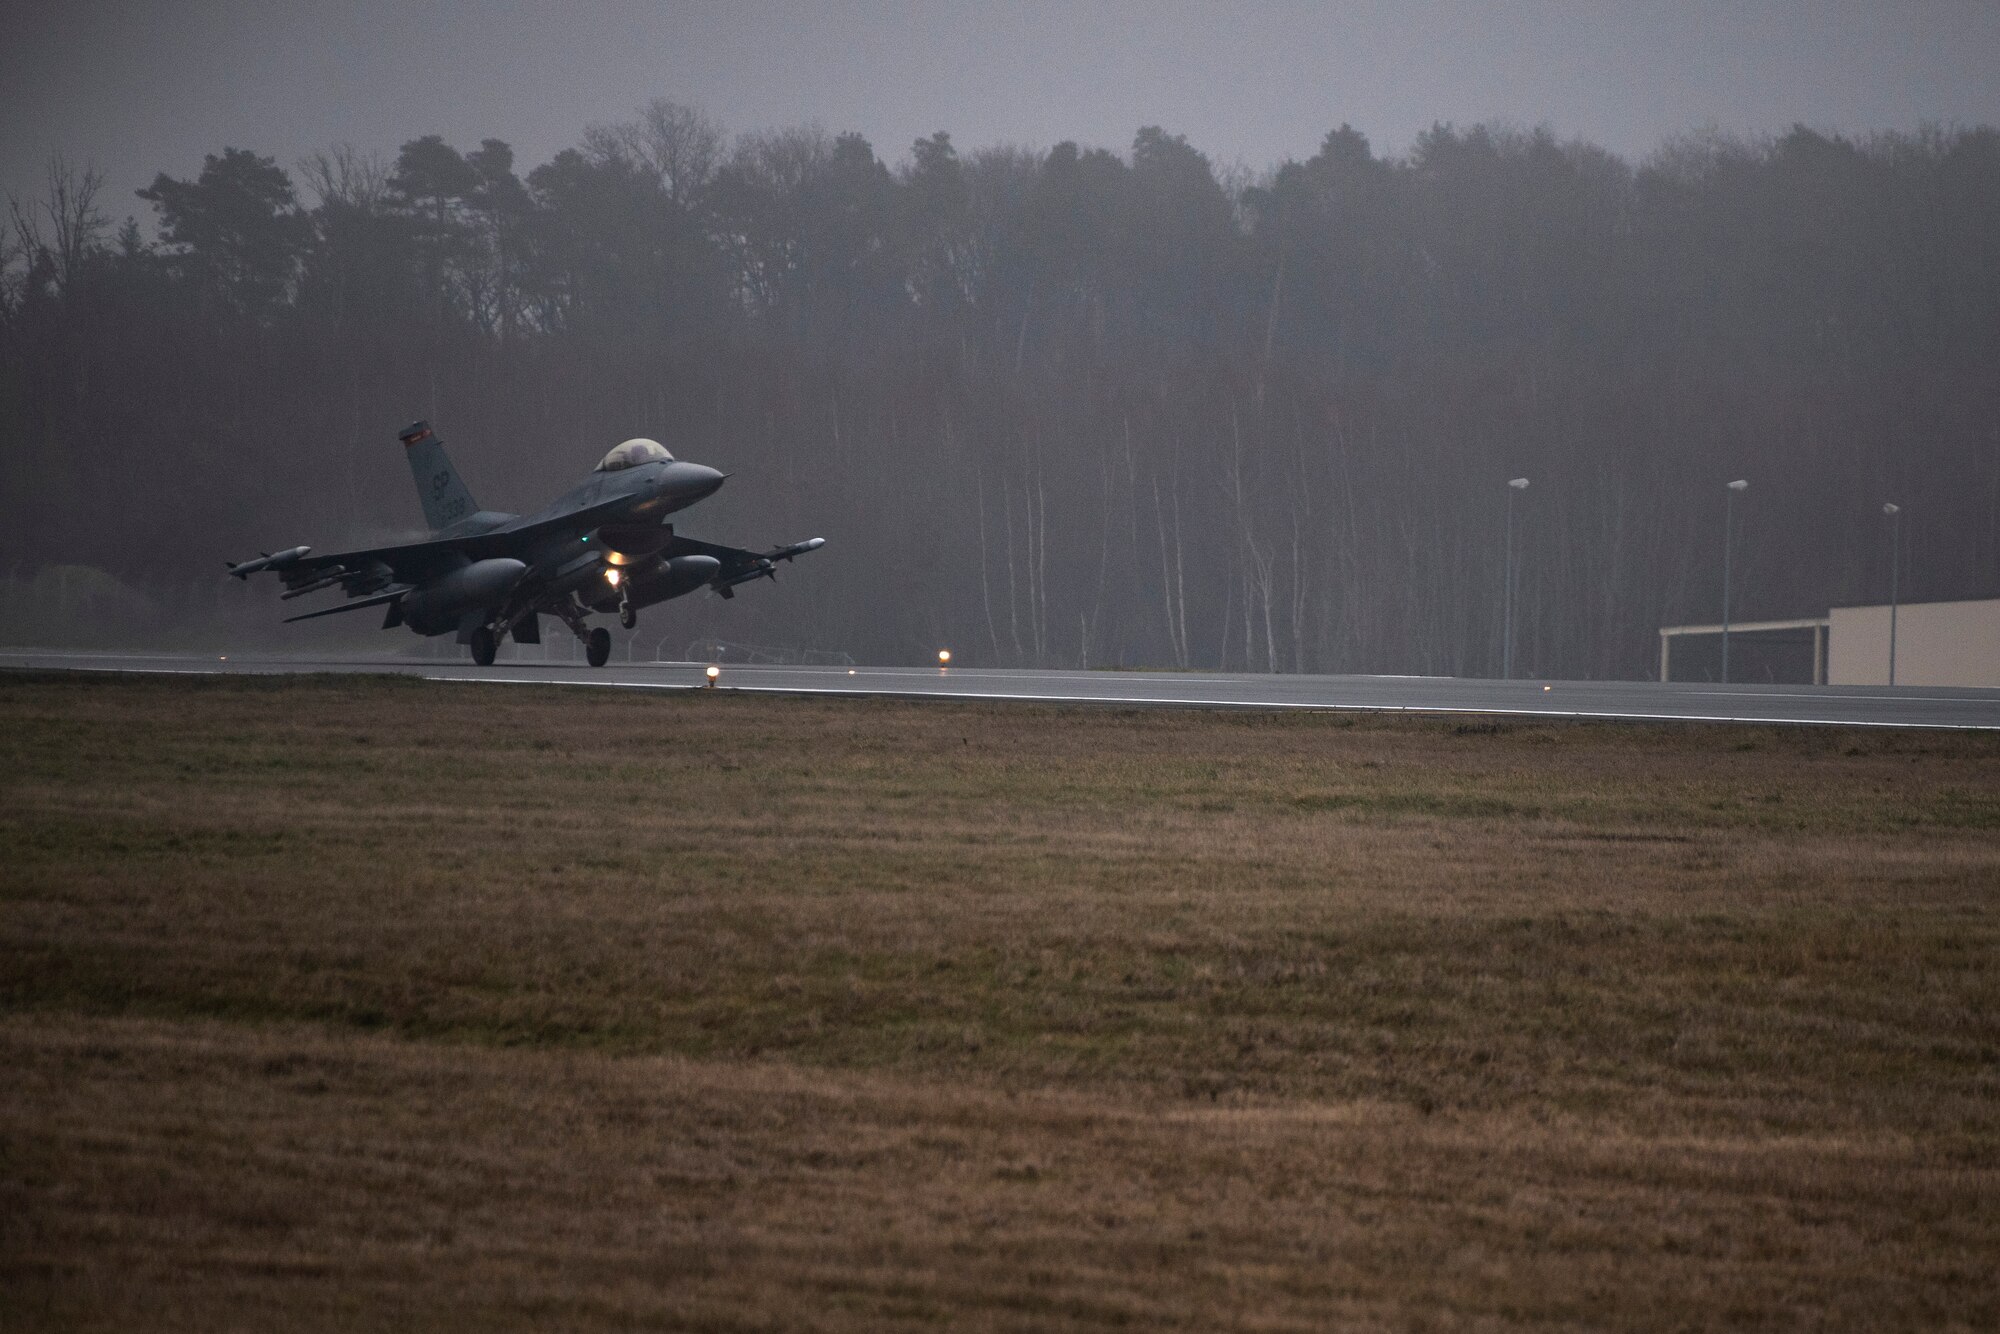 A U.S. Air Force F-16 Fighting Falcon, assigned to the 480th Fighter Squadron, lands at Spangdahlem Air Base, Germany, Dec. 10, 2019. Spangdahlem F-16s participated in an Allied Combat Lethality Exercise with the Polish air force to provide Airmen the opportunity to fly and train alongside NATO allies. Multinational exercises build and strengthen relationships between partner nations. (U.S. Air Force photo by Airman 1st Class Valerie Seelye)